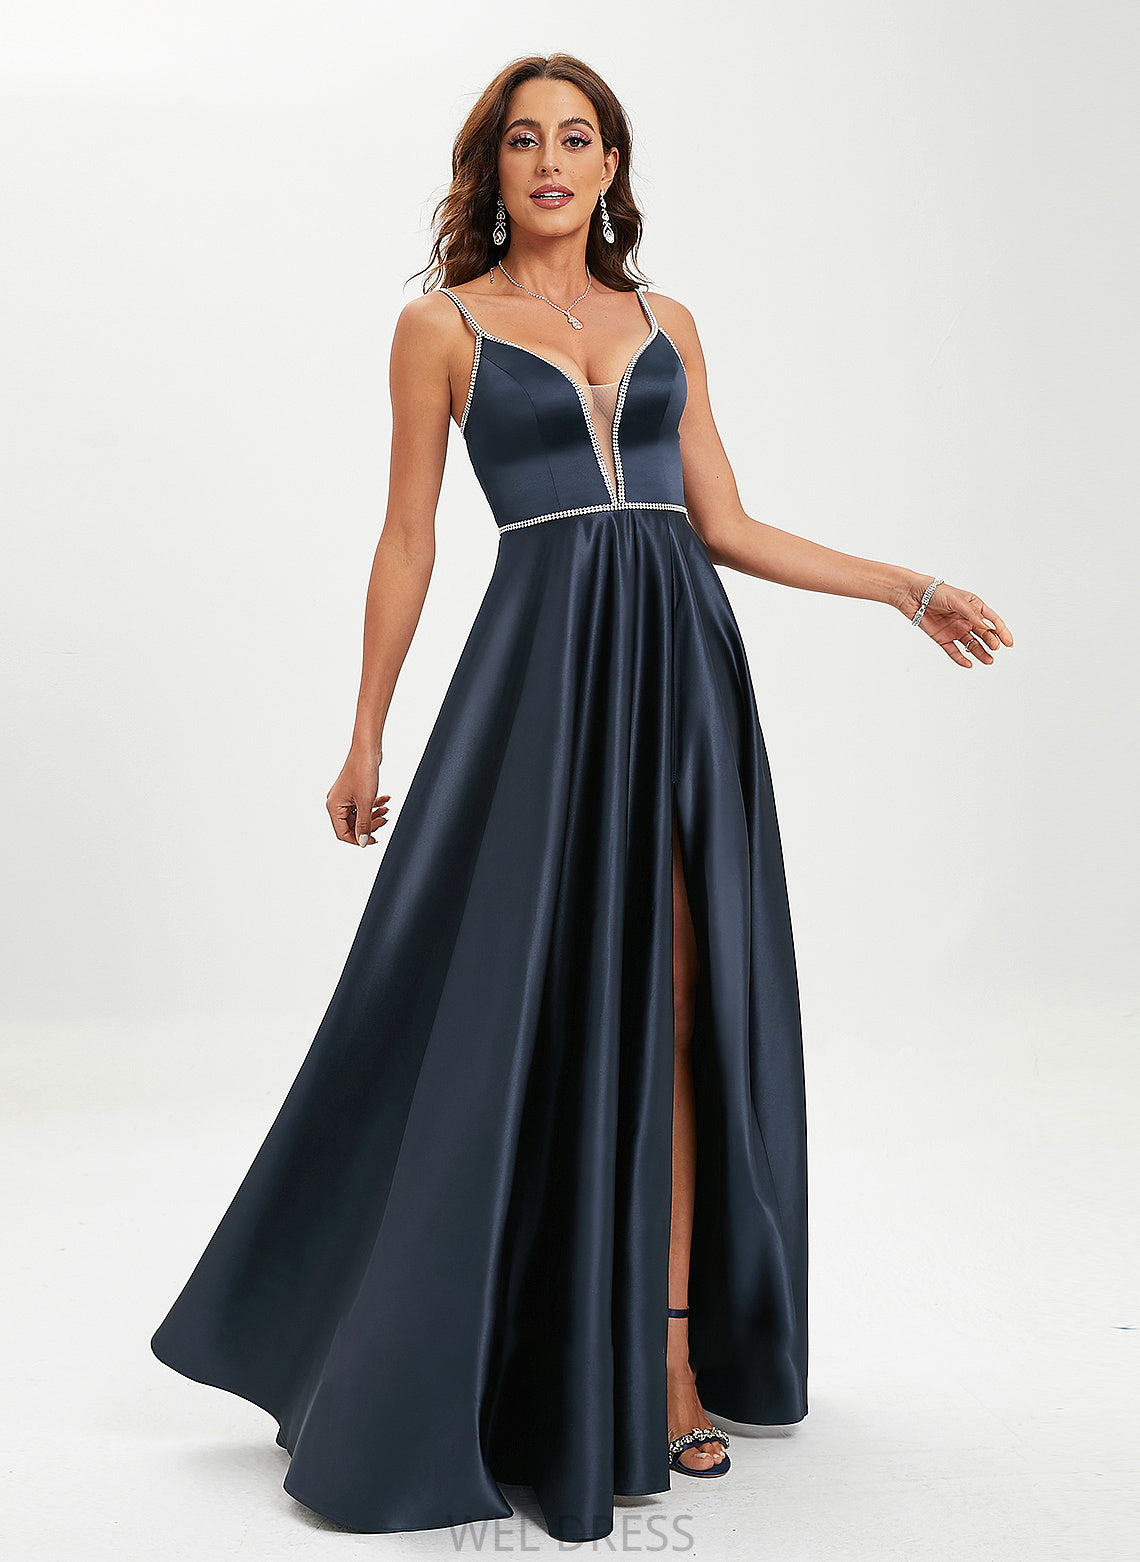 Beading Ball-Gown/Princess Floor-Length With V-neck Sequins Lilianna Satin Prom Dresses